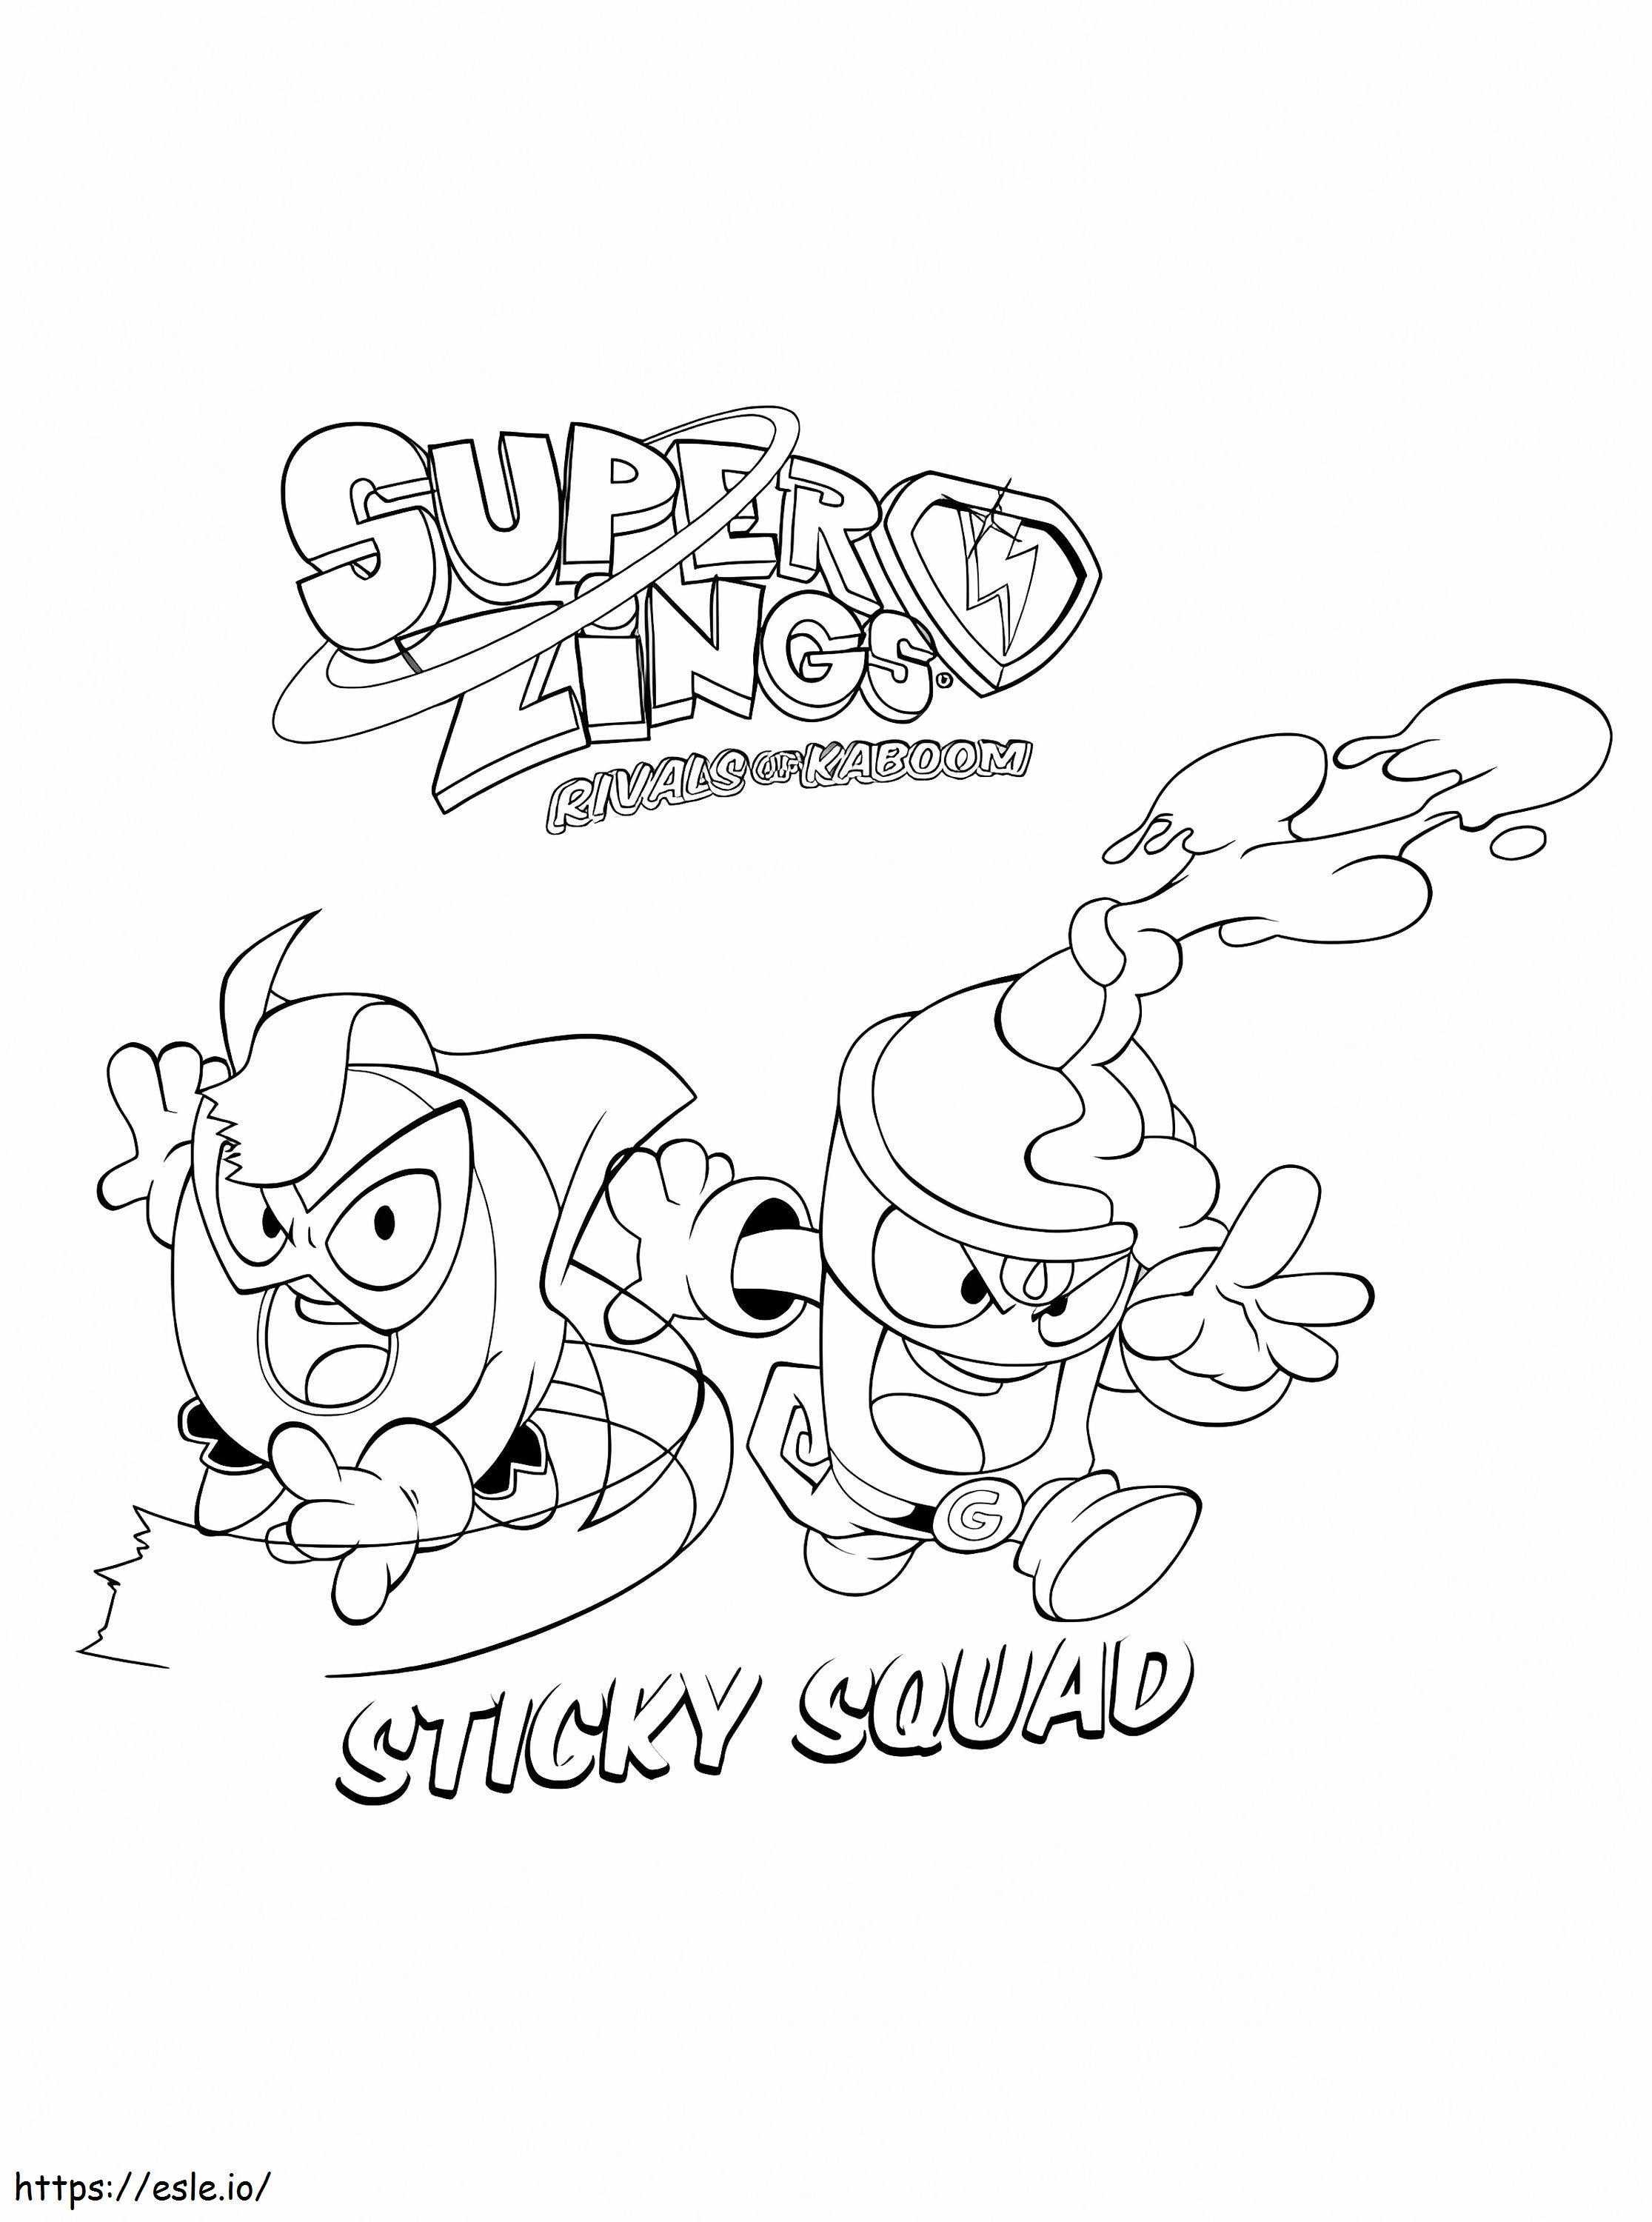 Sticky Squad Superzings coloring page